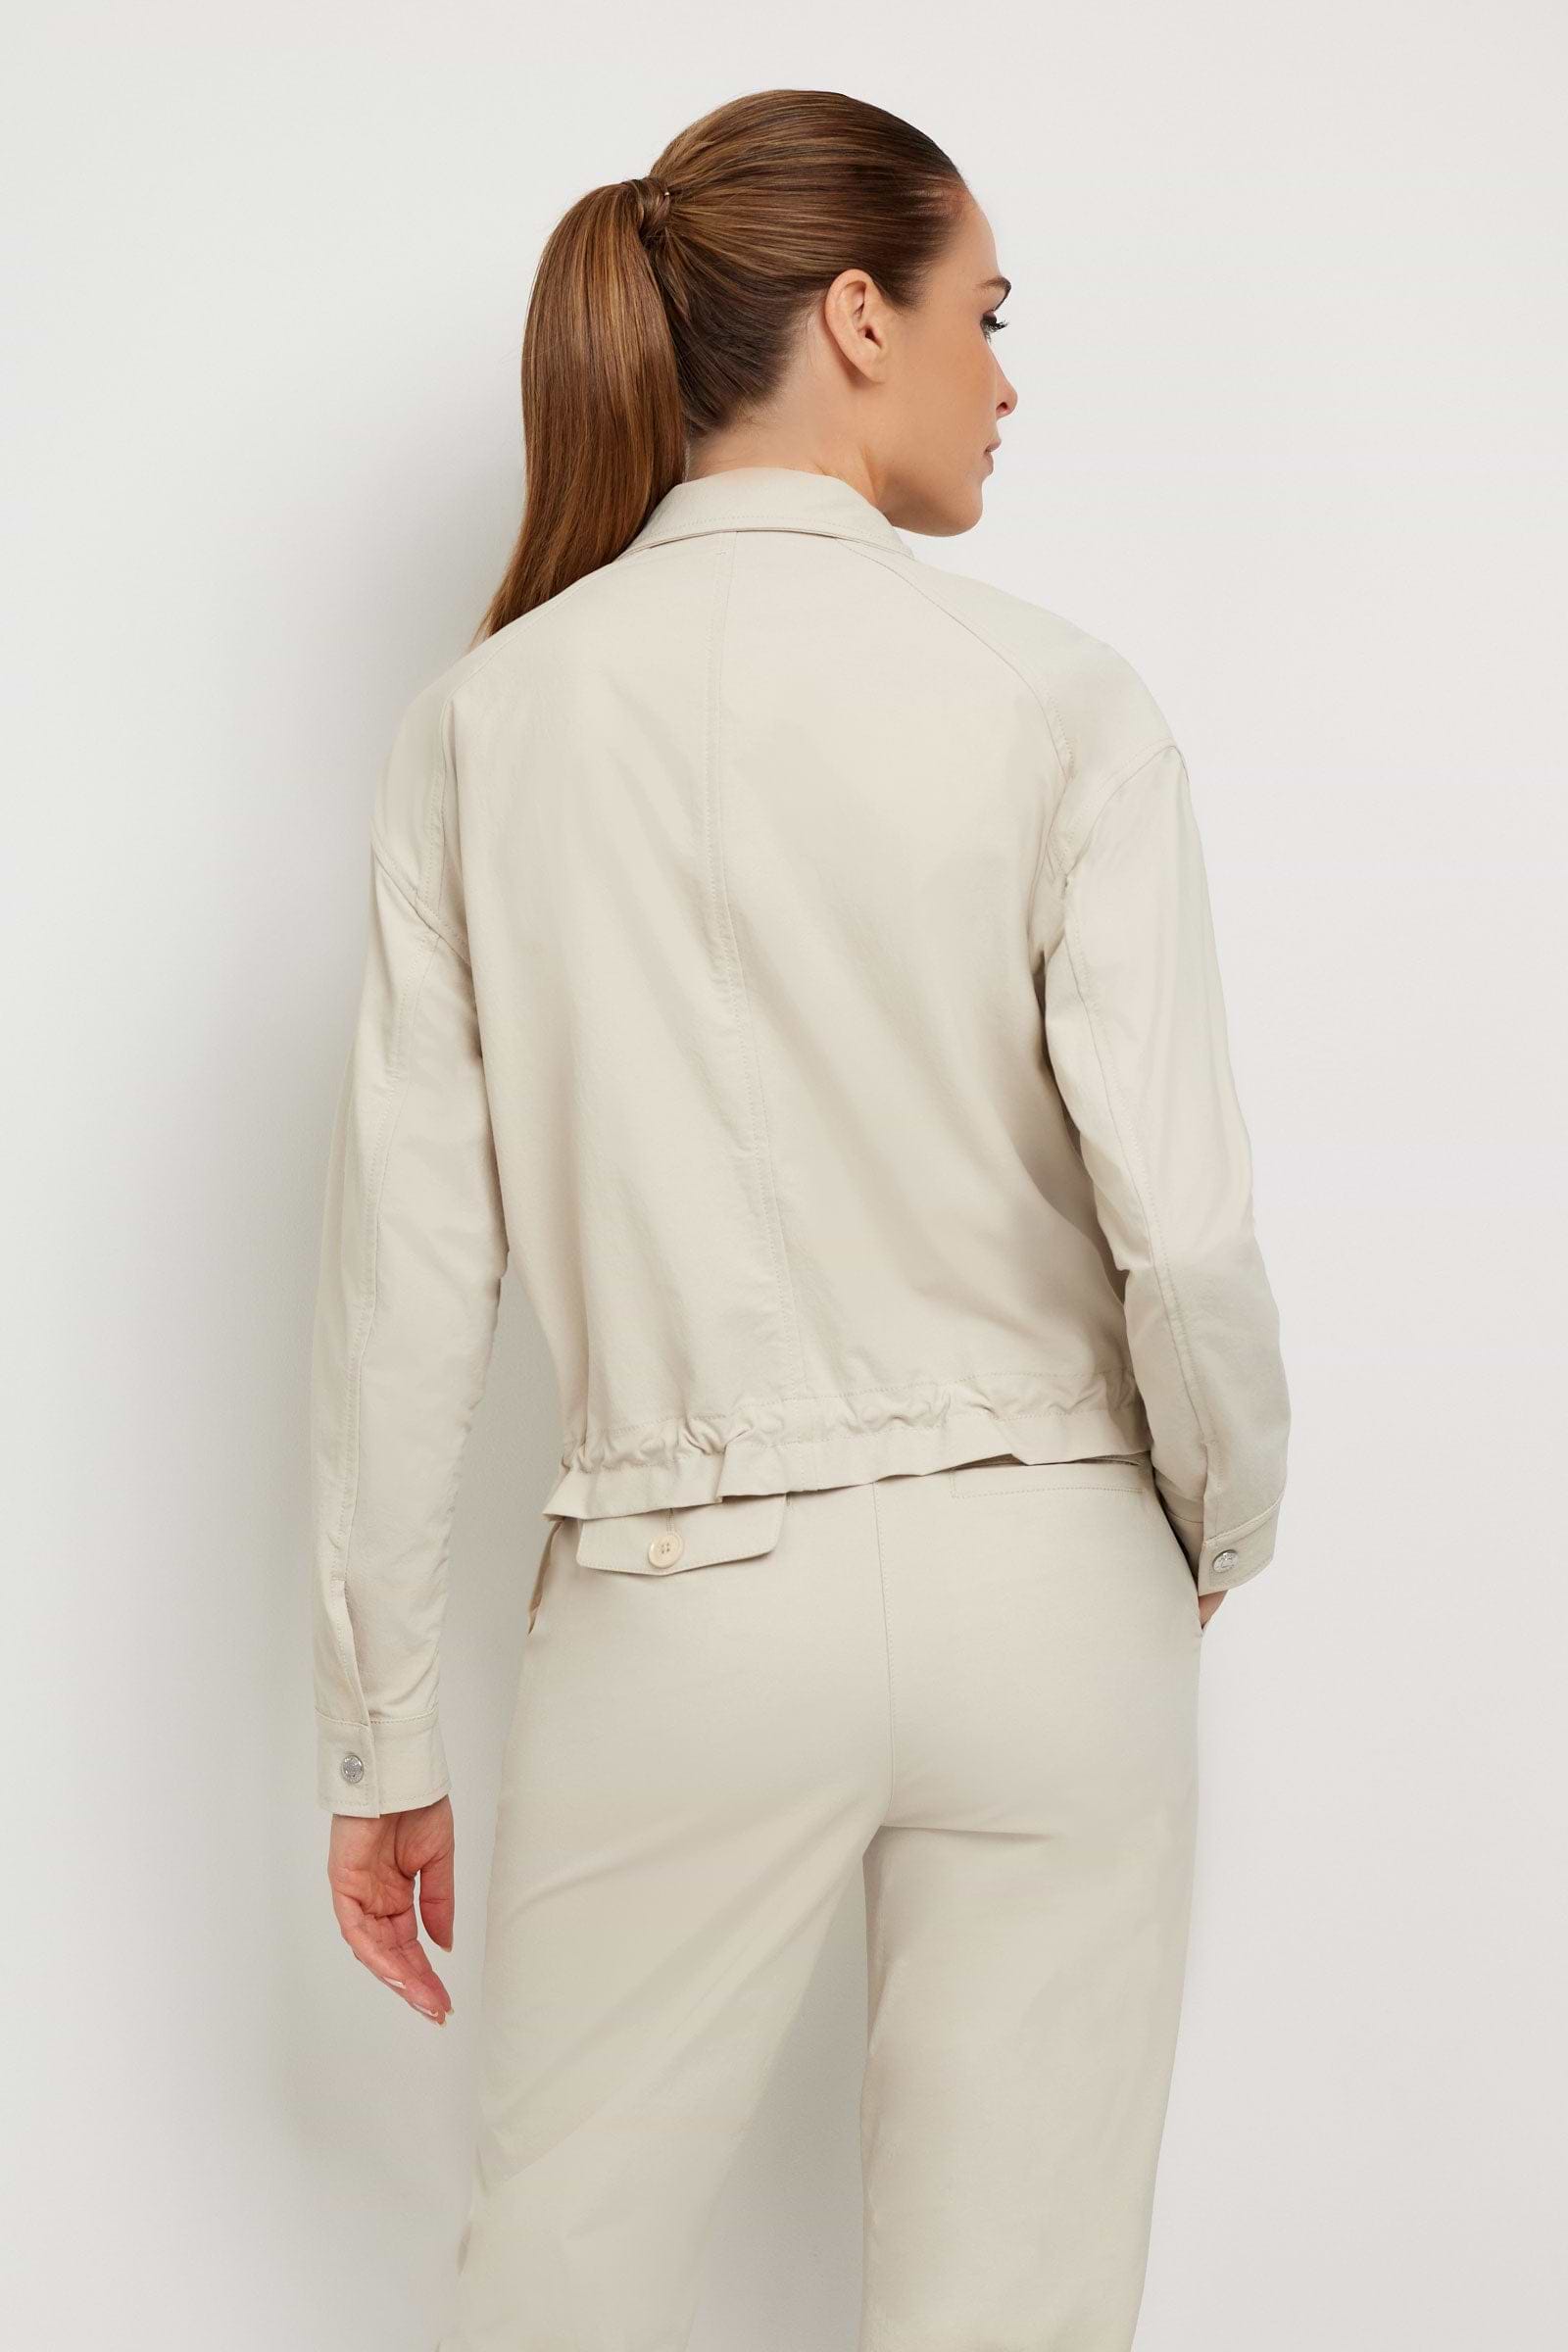 The Best Travel Jacket. Woman Showing the Back Profile of a Blaise Jacket in Champagne.